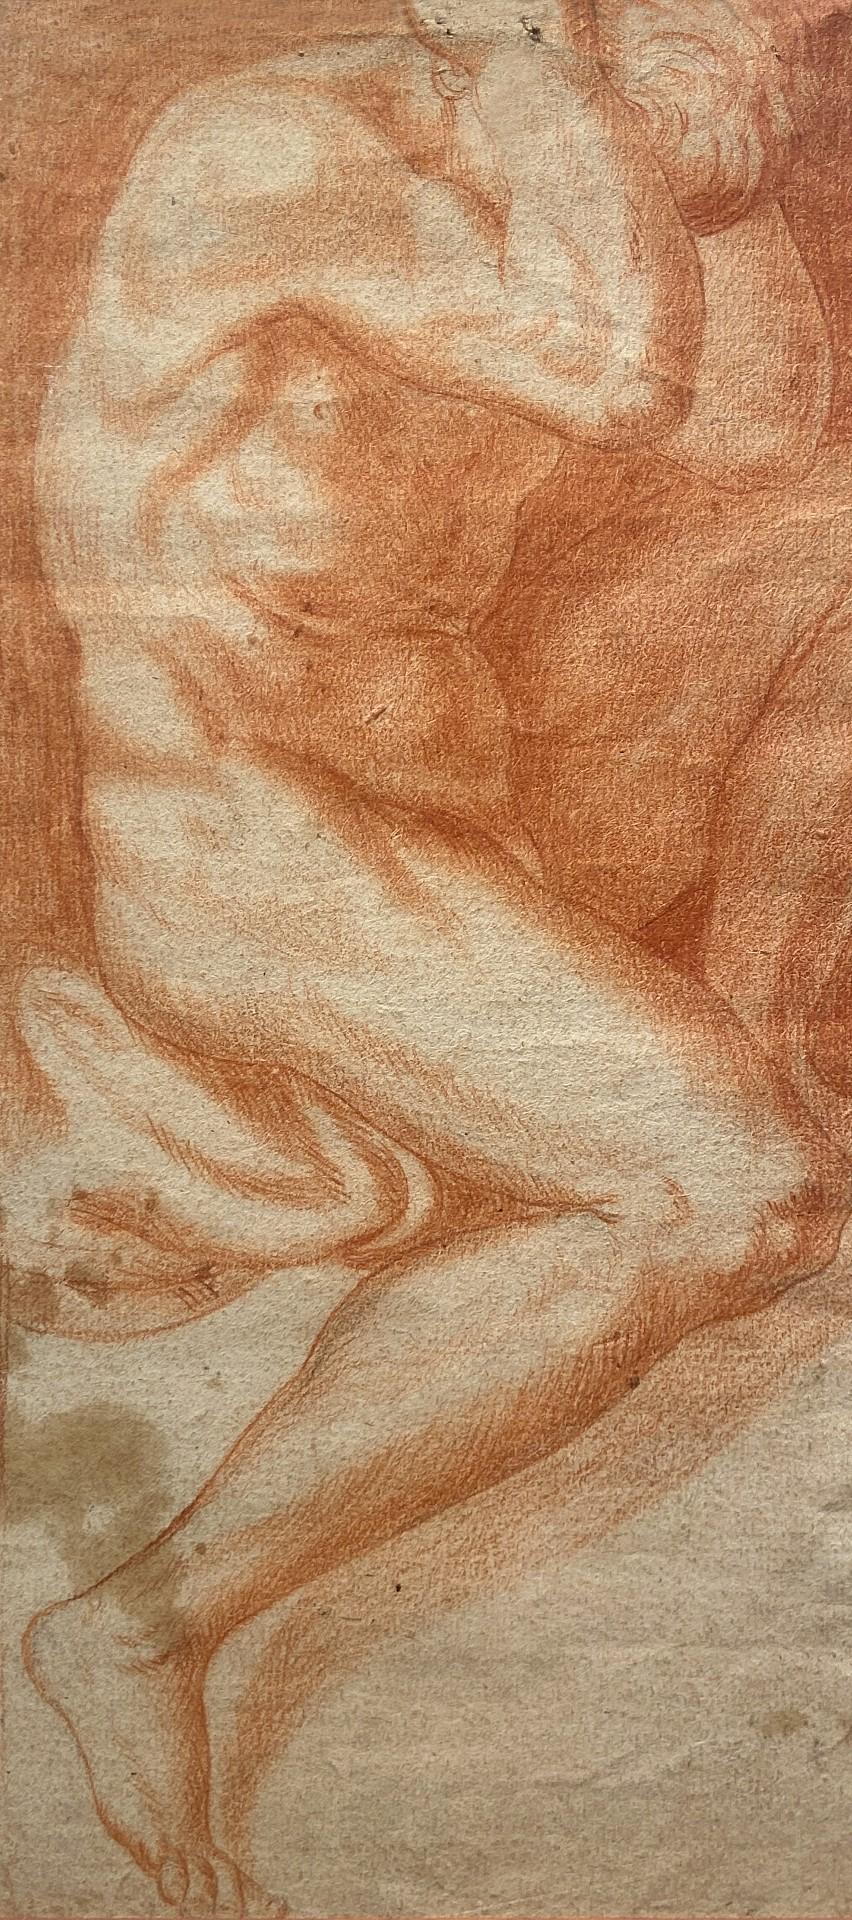 The Captive, Study of a Naked Man, Red Chalk Study, Carracci Gallery